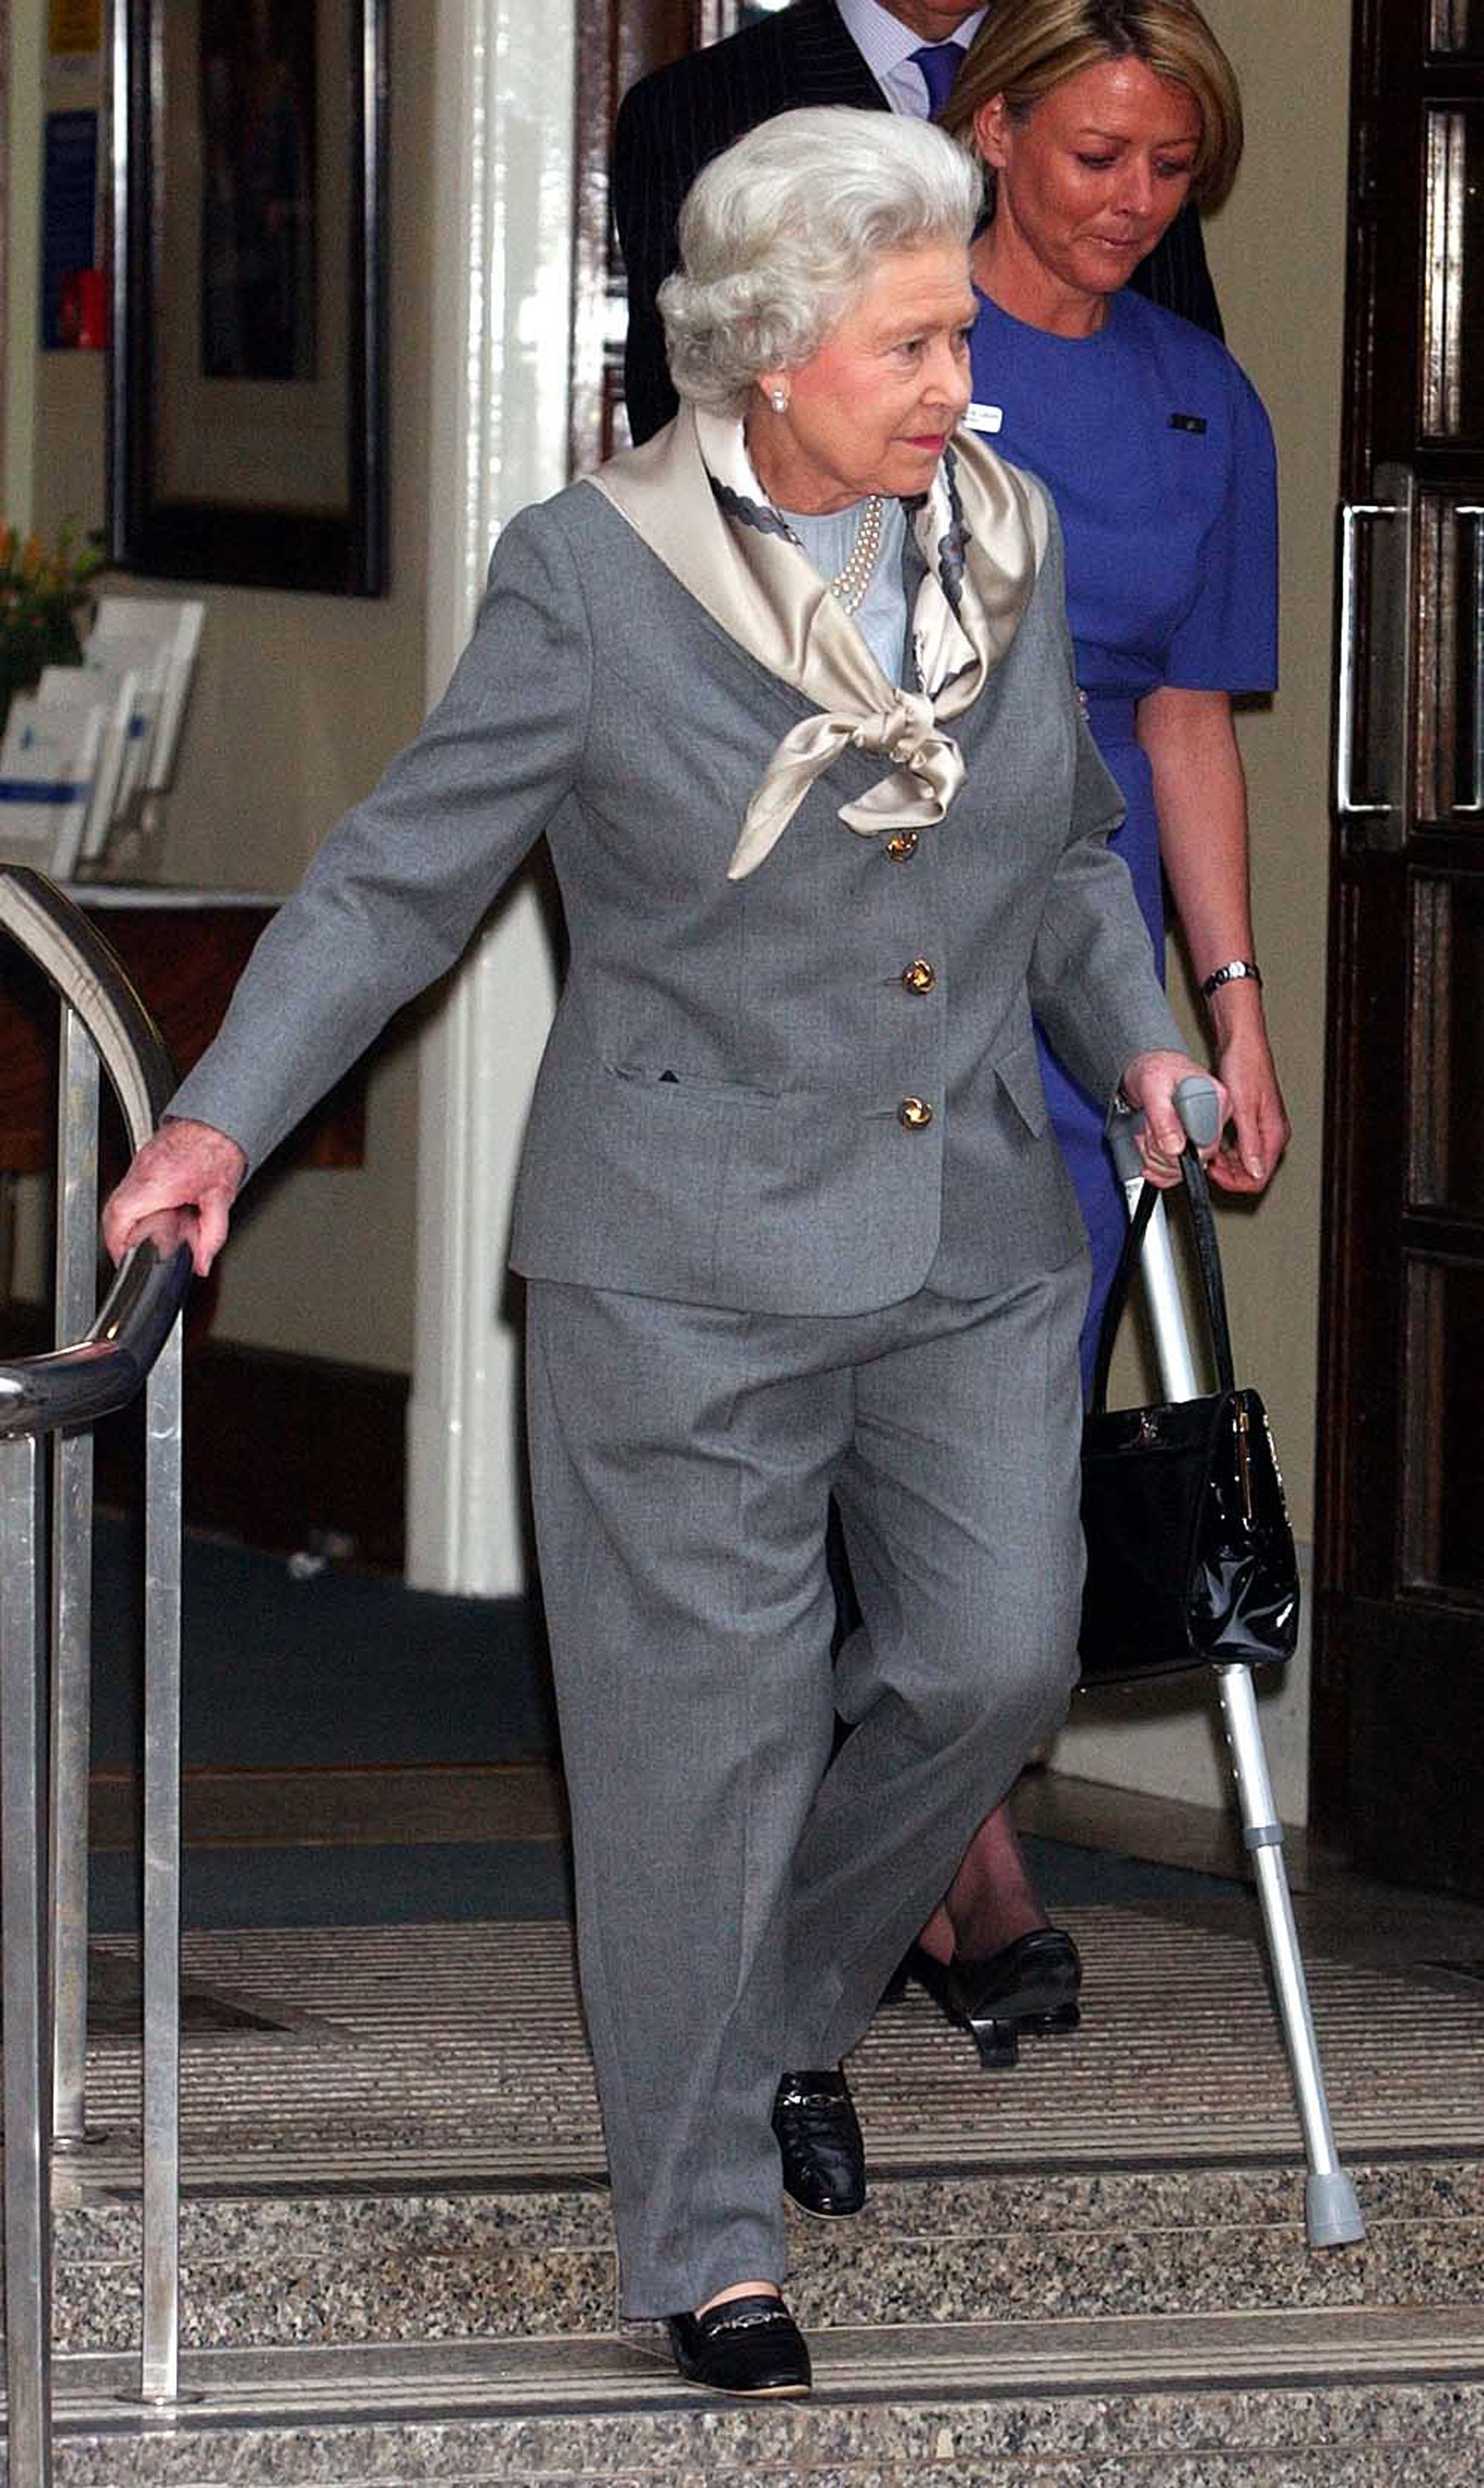 The Queen walks with a stick as she leaves the King Edward VII Hospital in 2003